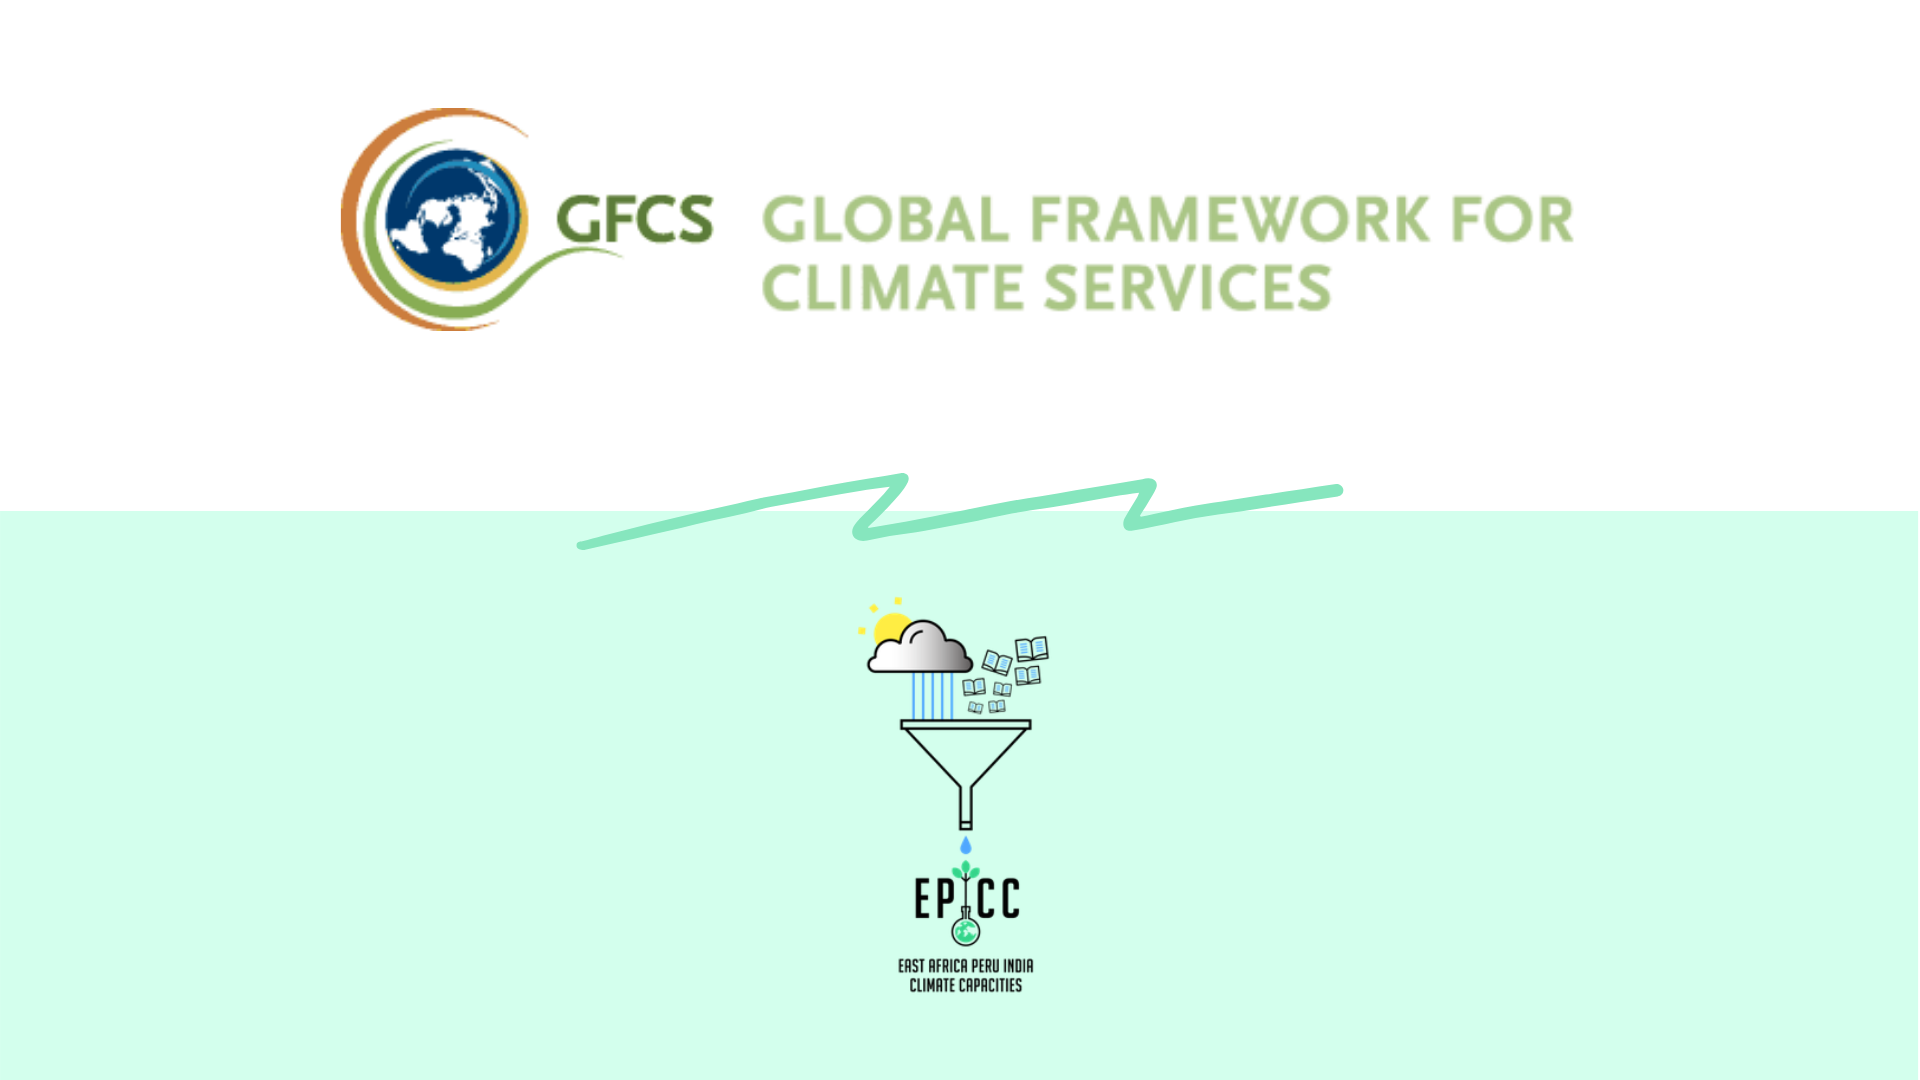 EPICC has been listed as a contributing project to the Global Framework for Climate Services GFCS